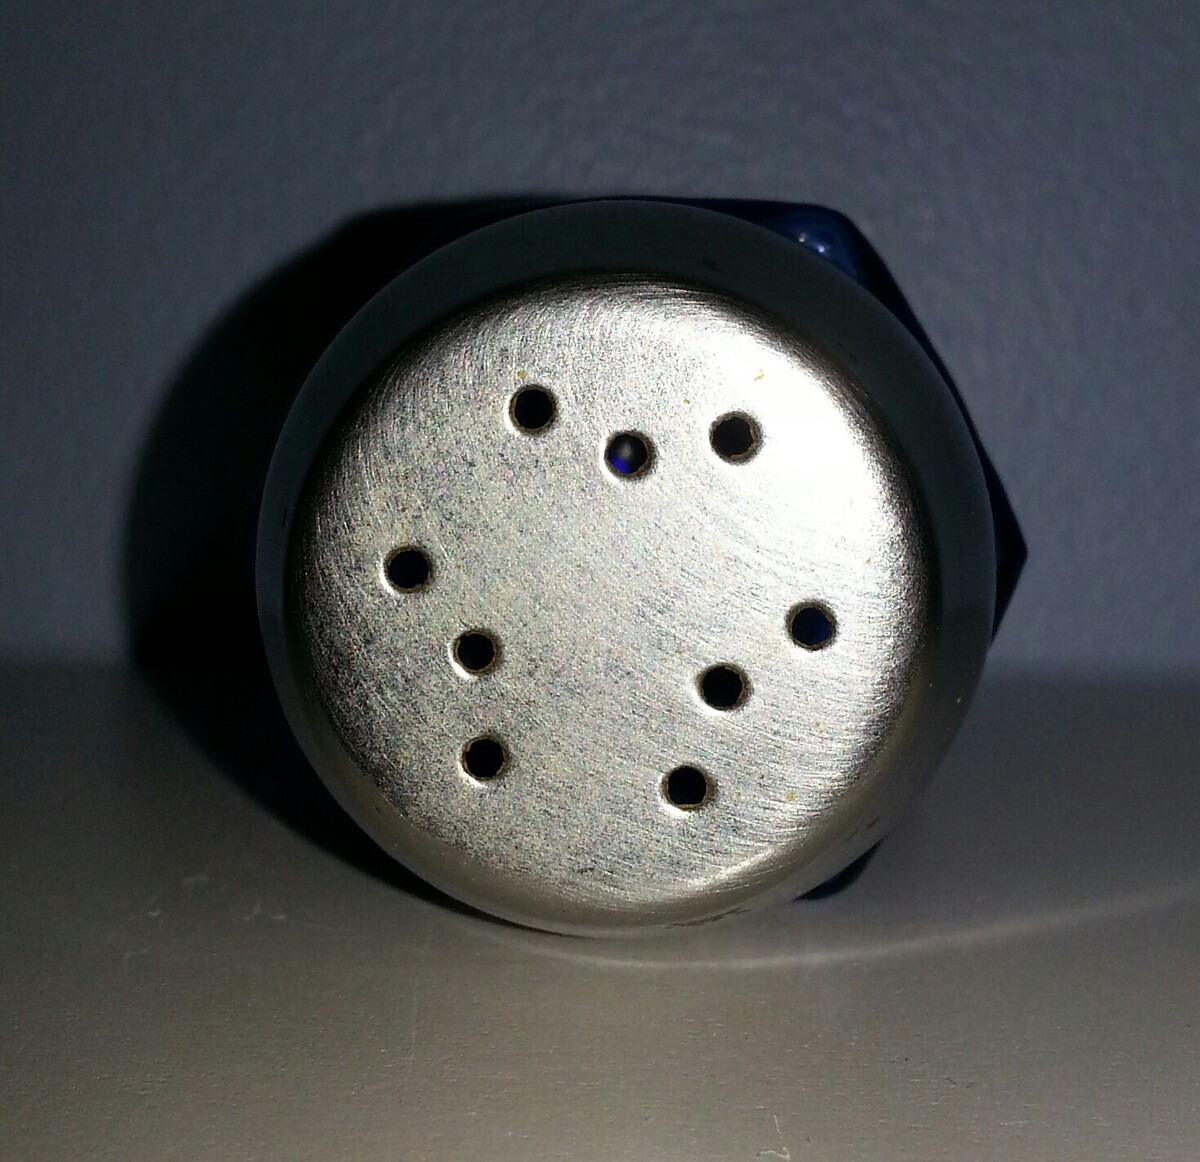 How Many Holes Should Salt And Pepper Shakers Have?